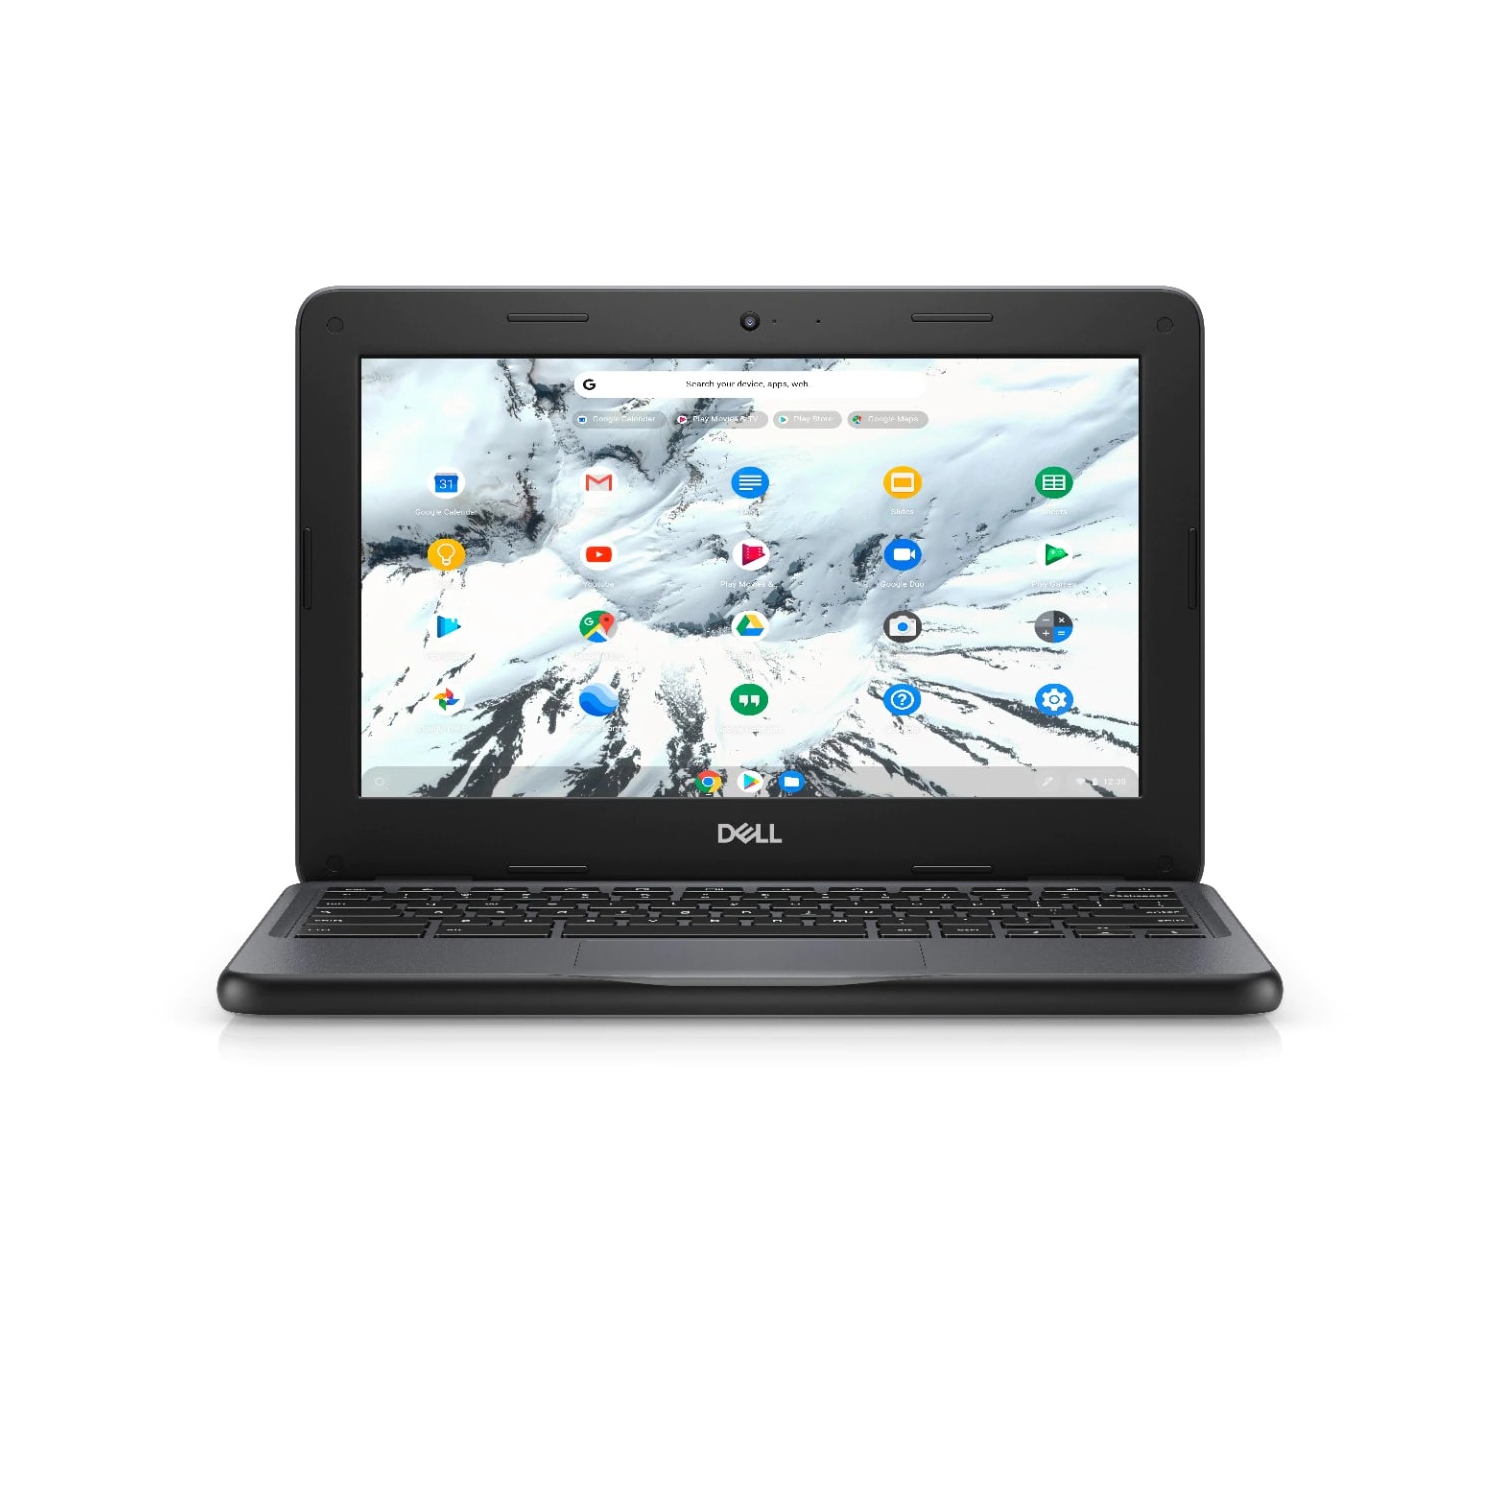 Refurbished (Excellent) - Dell Chromebook 11 3100 Laptop (2019) | 11.6" HD | Core Celeron - 32GB SSD - 4GB RAM | 2 Cores Certified Refurbished